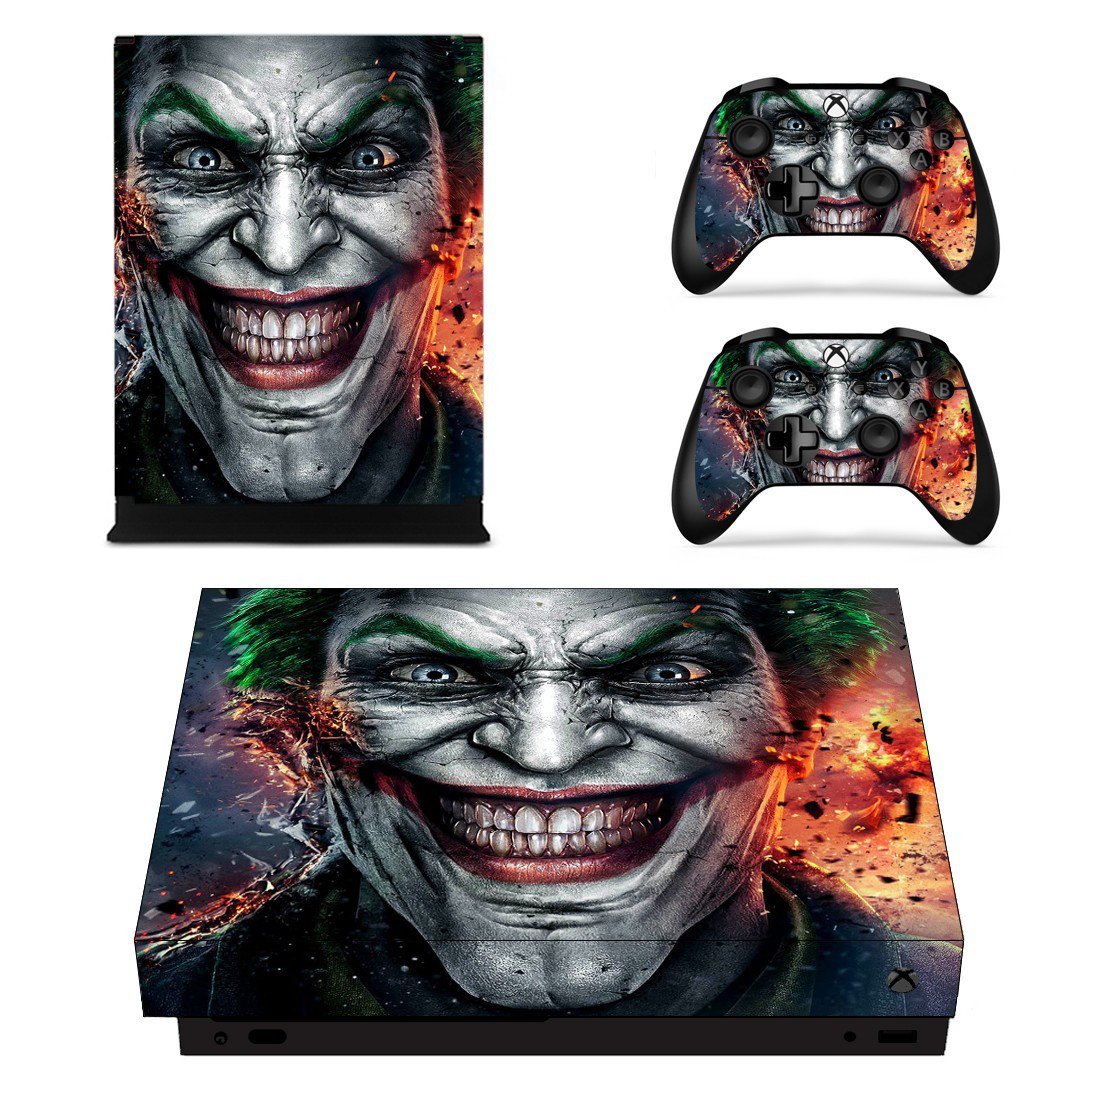 The Joker Skin Sticker Decal for Xbox One X Controllers